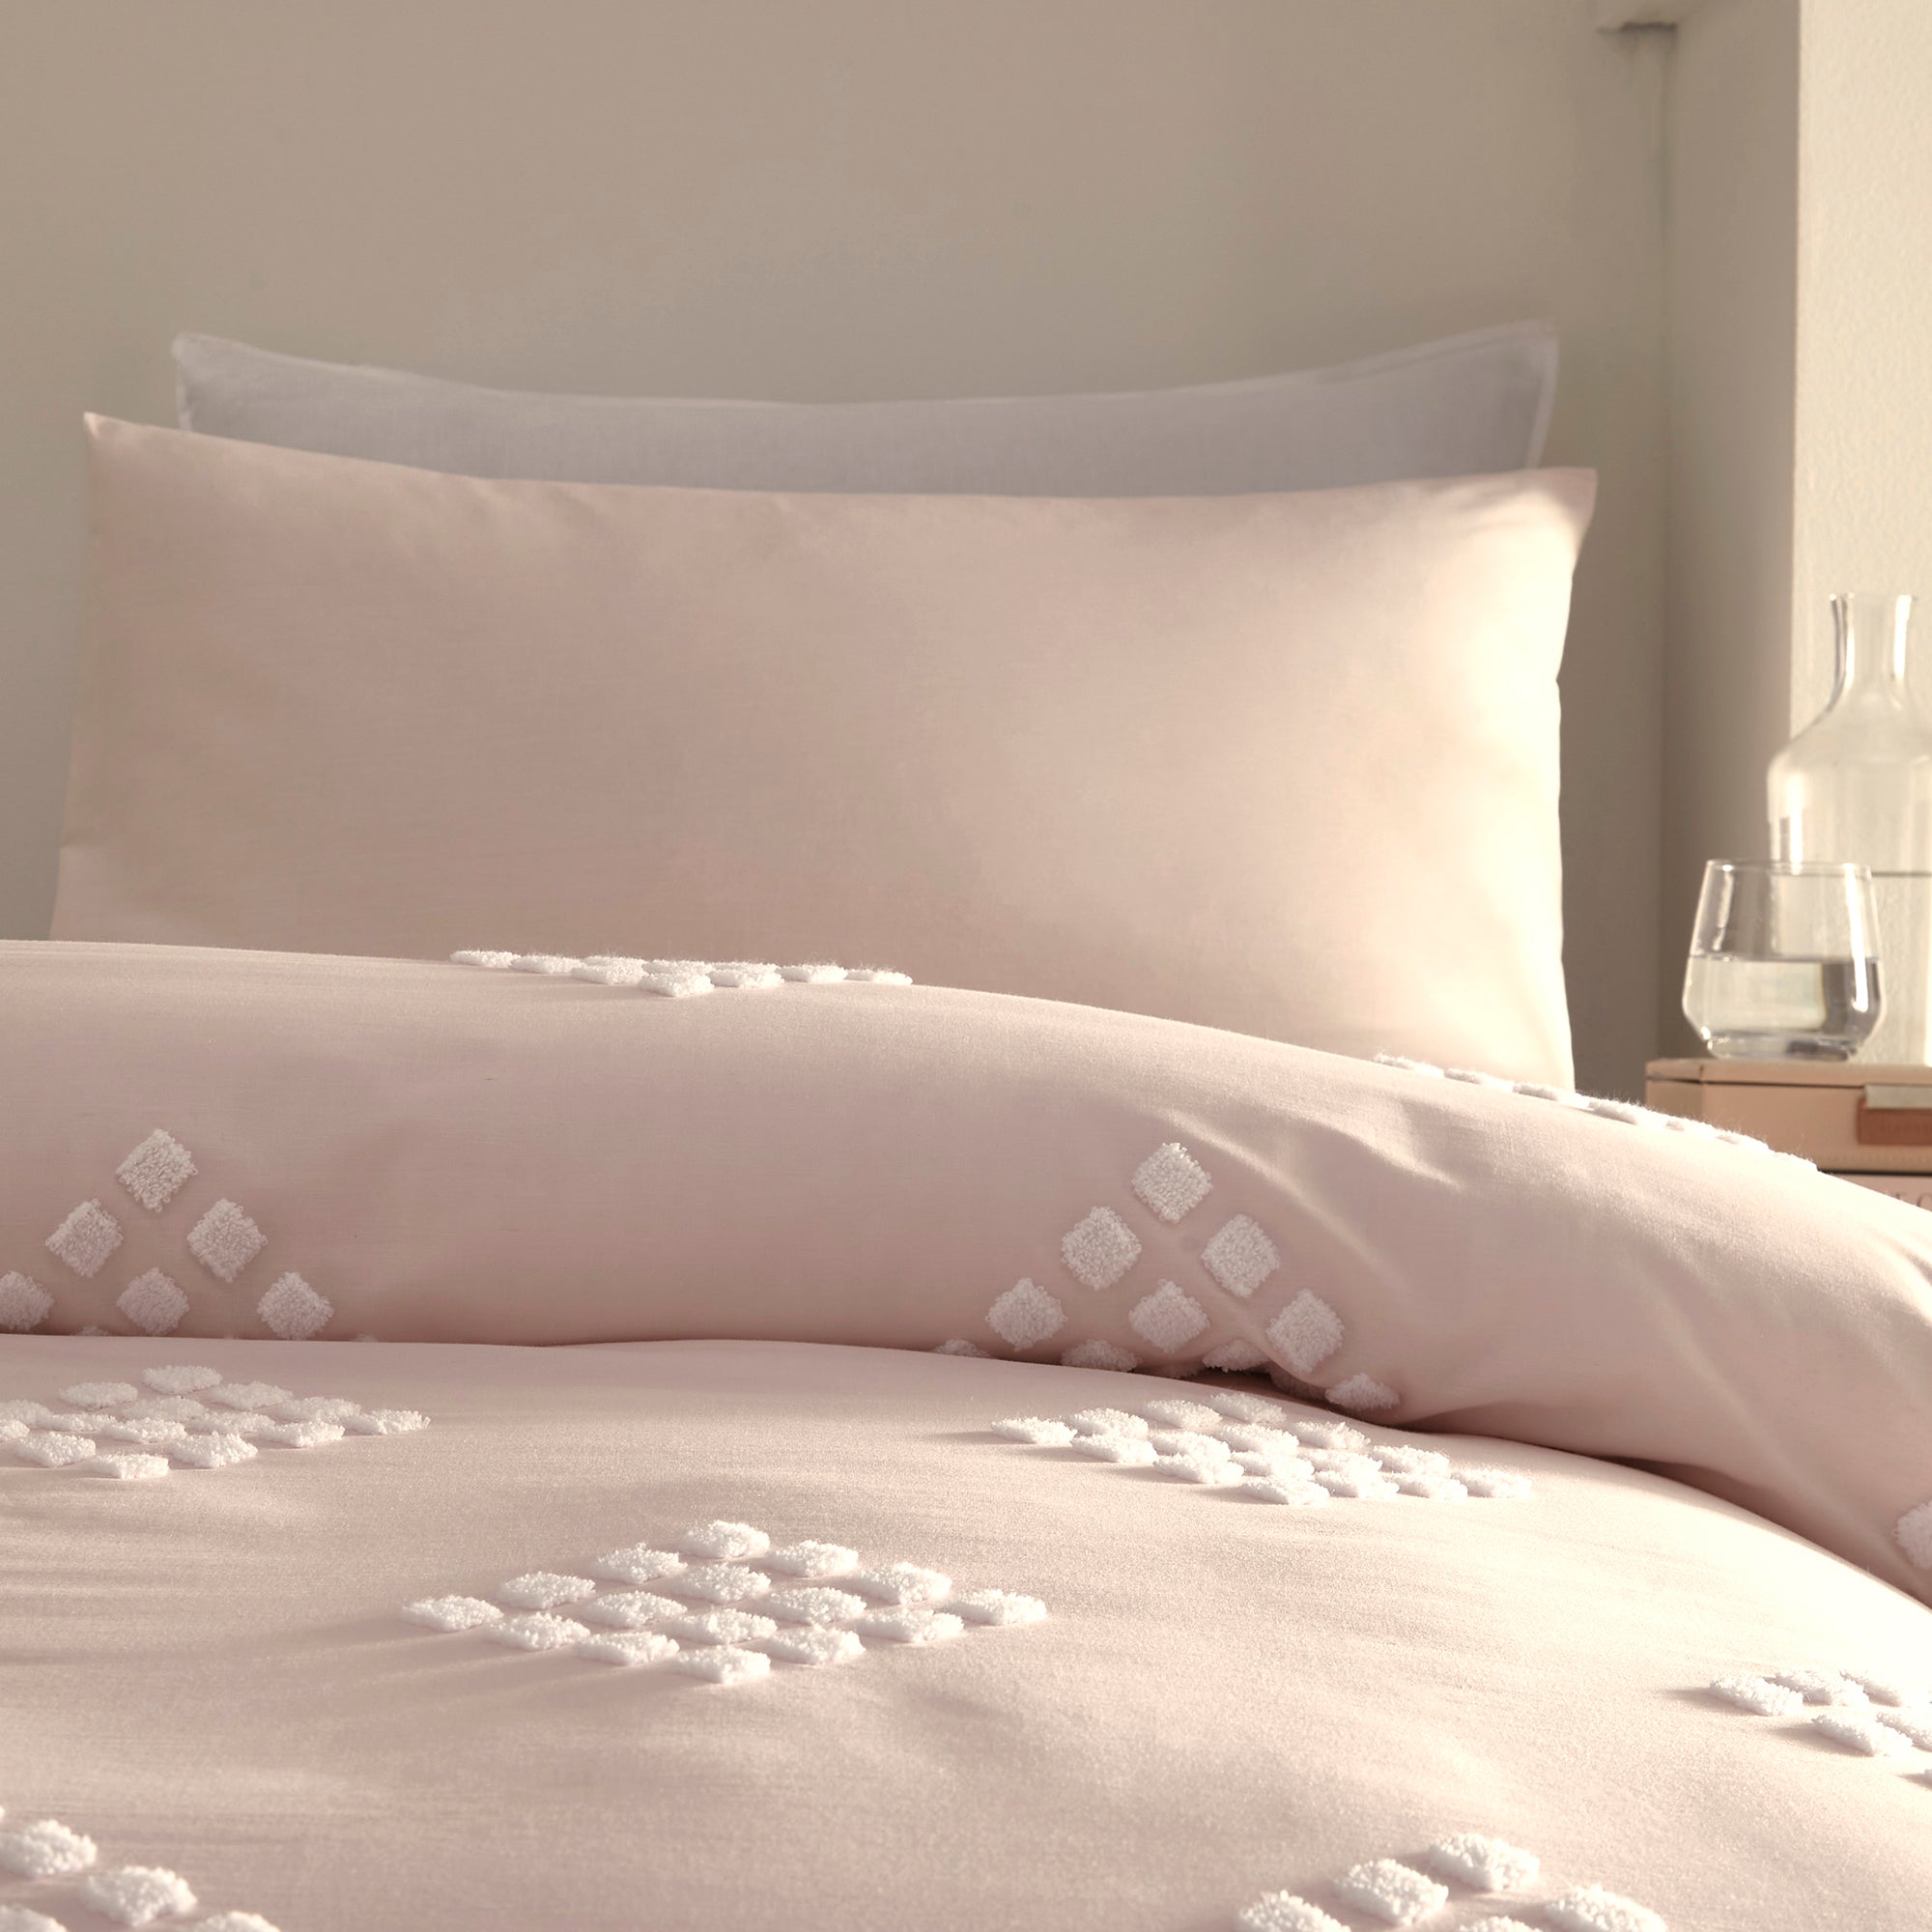 Diamond Tuft - 100% Cotton Duvet Cover Set in Blush - by Appletree Boutique